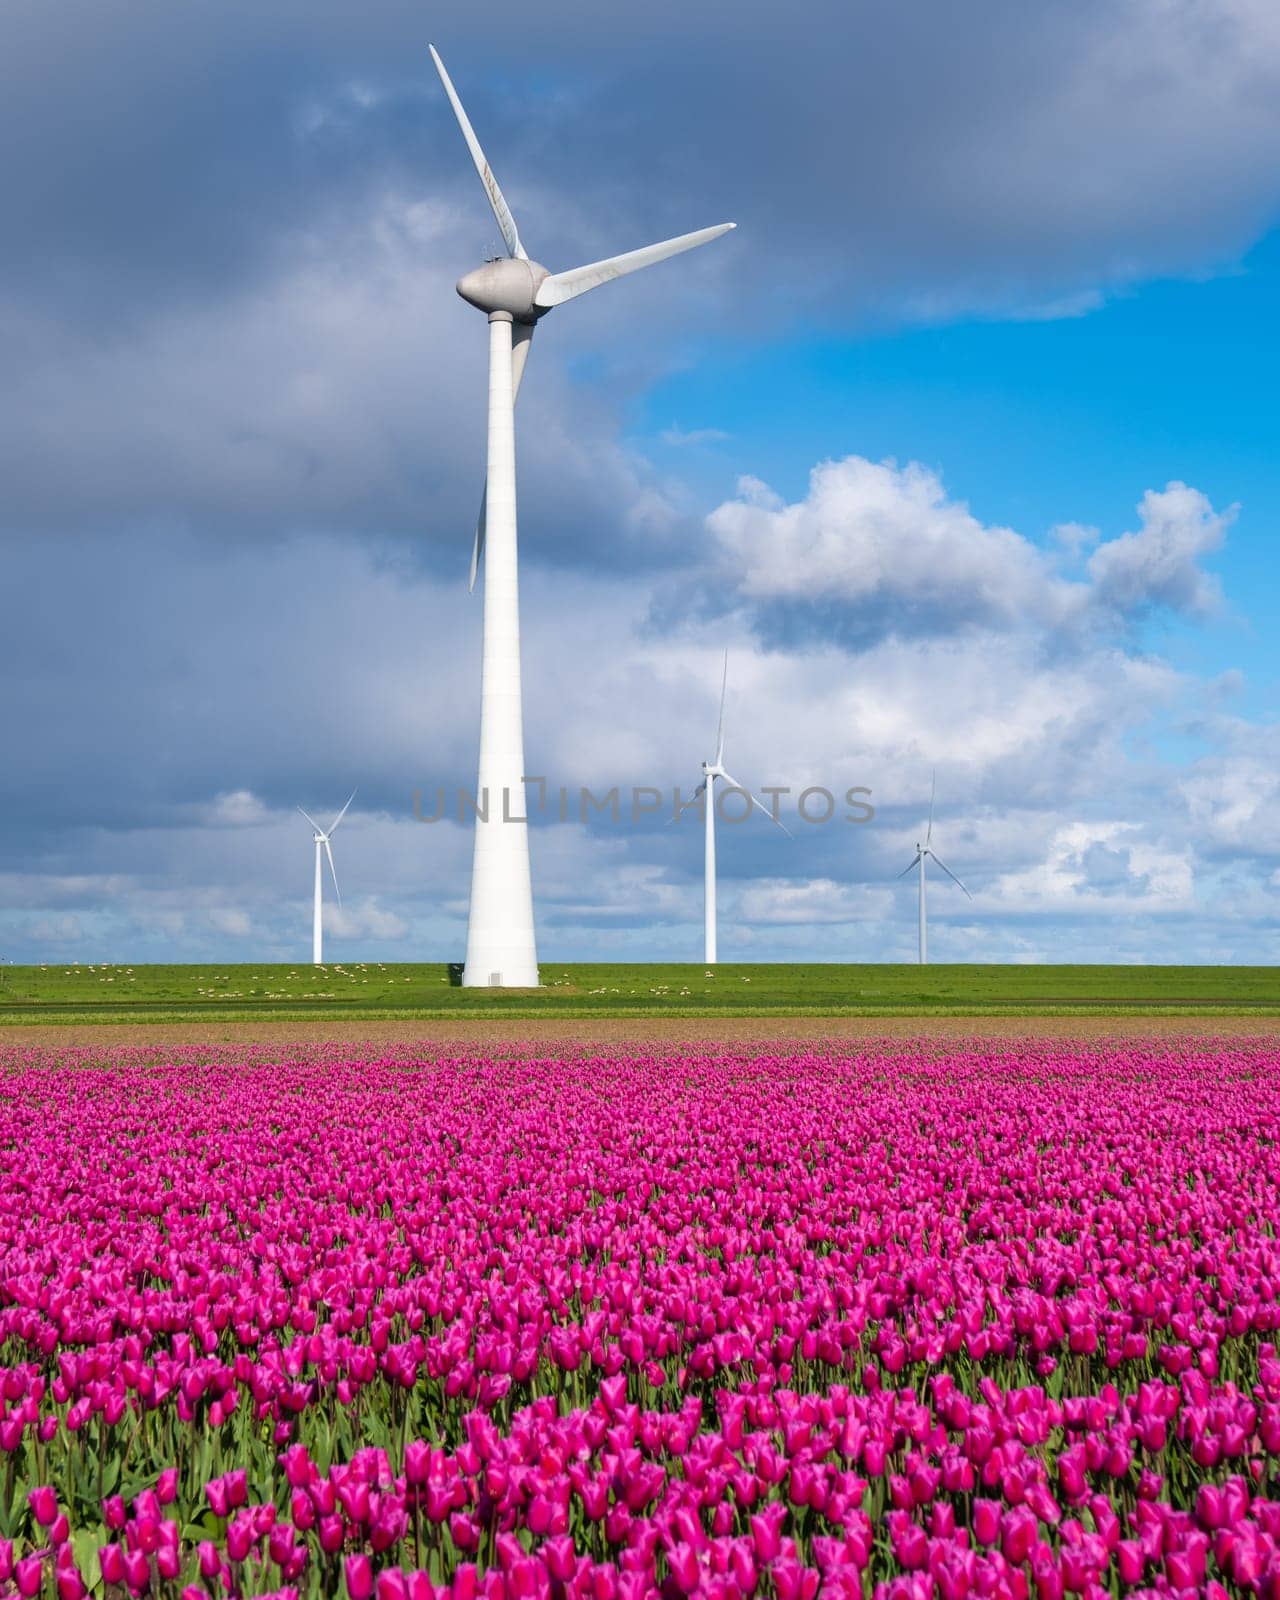 A field of vibrant purple tulips stretches as far as the eye can see, with a traditional windmill standing tall in the background against a clear blue sky by fokkebok